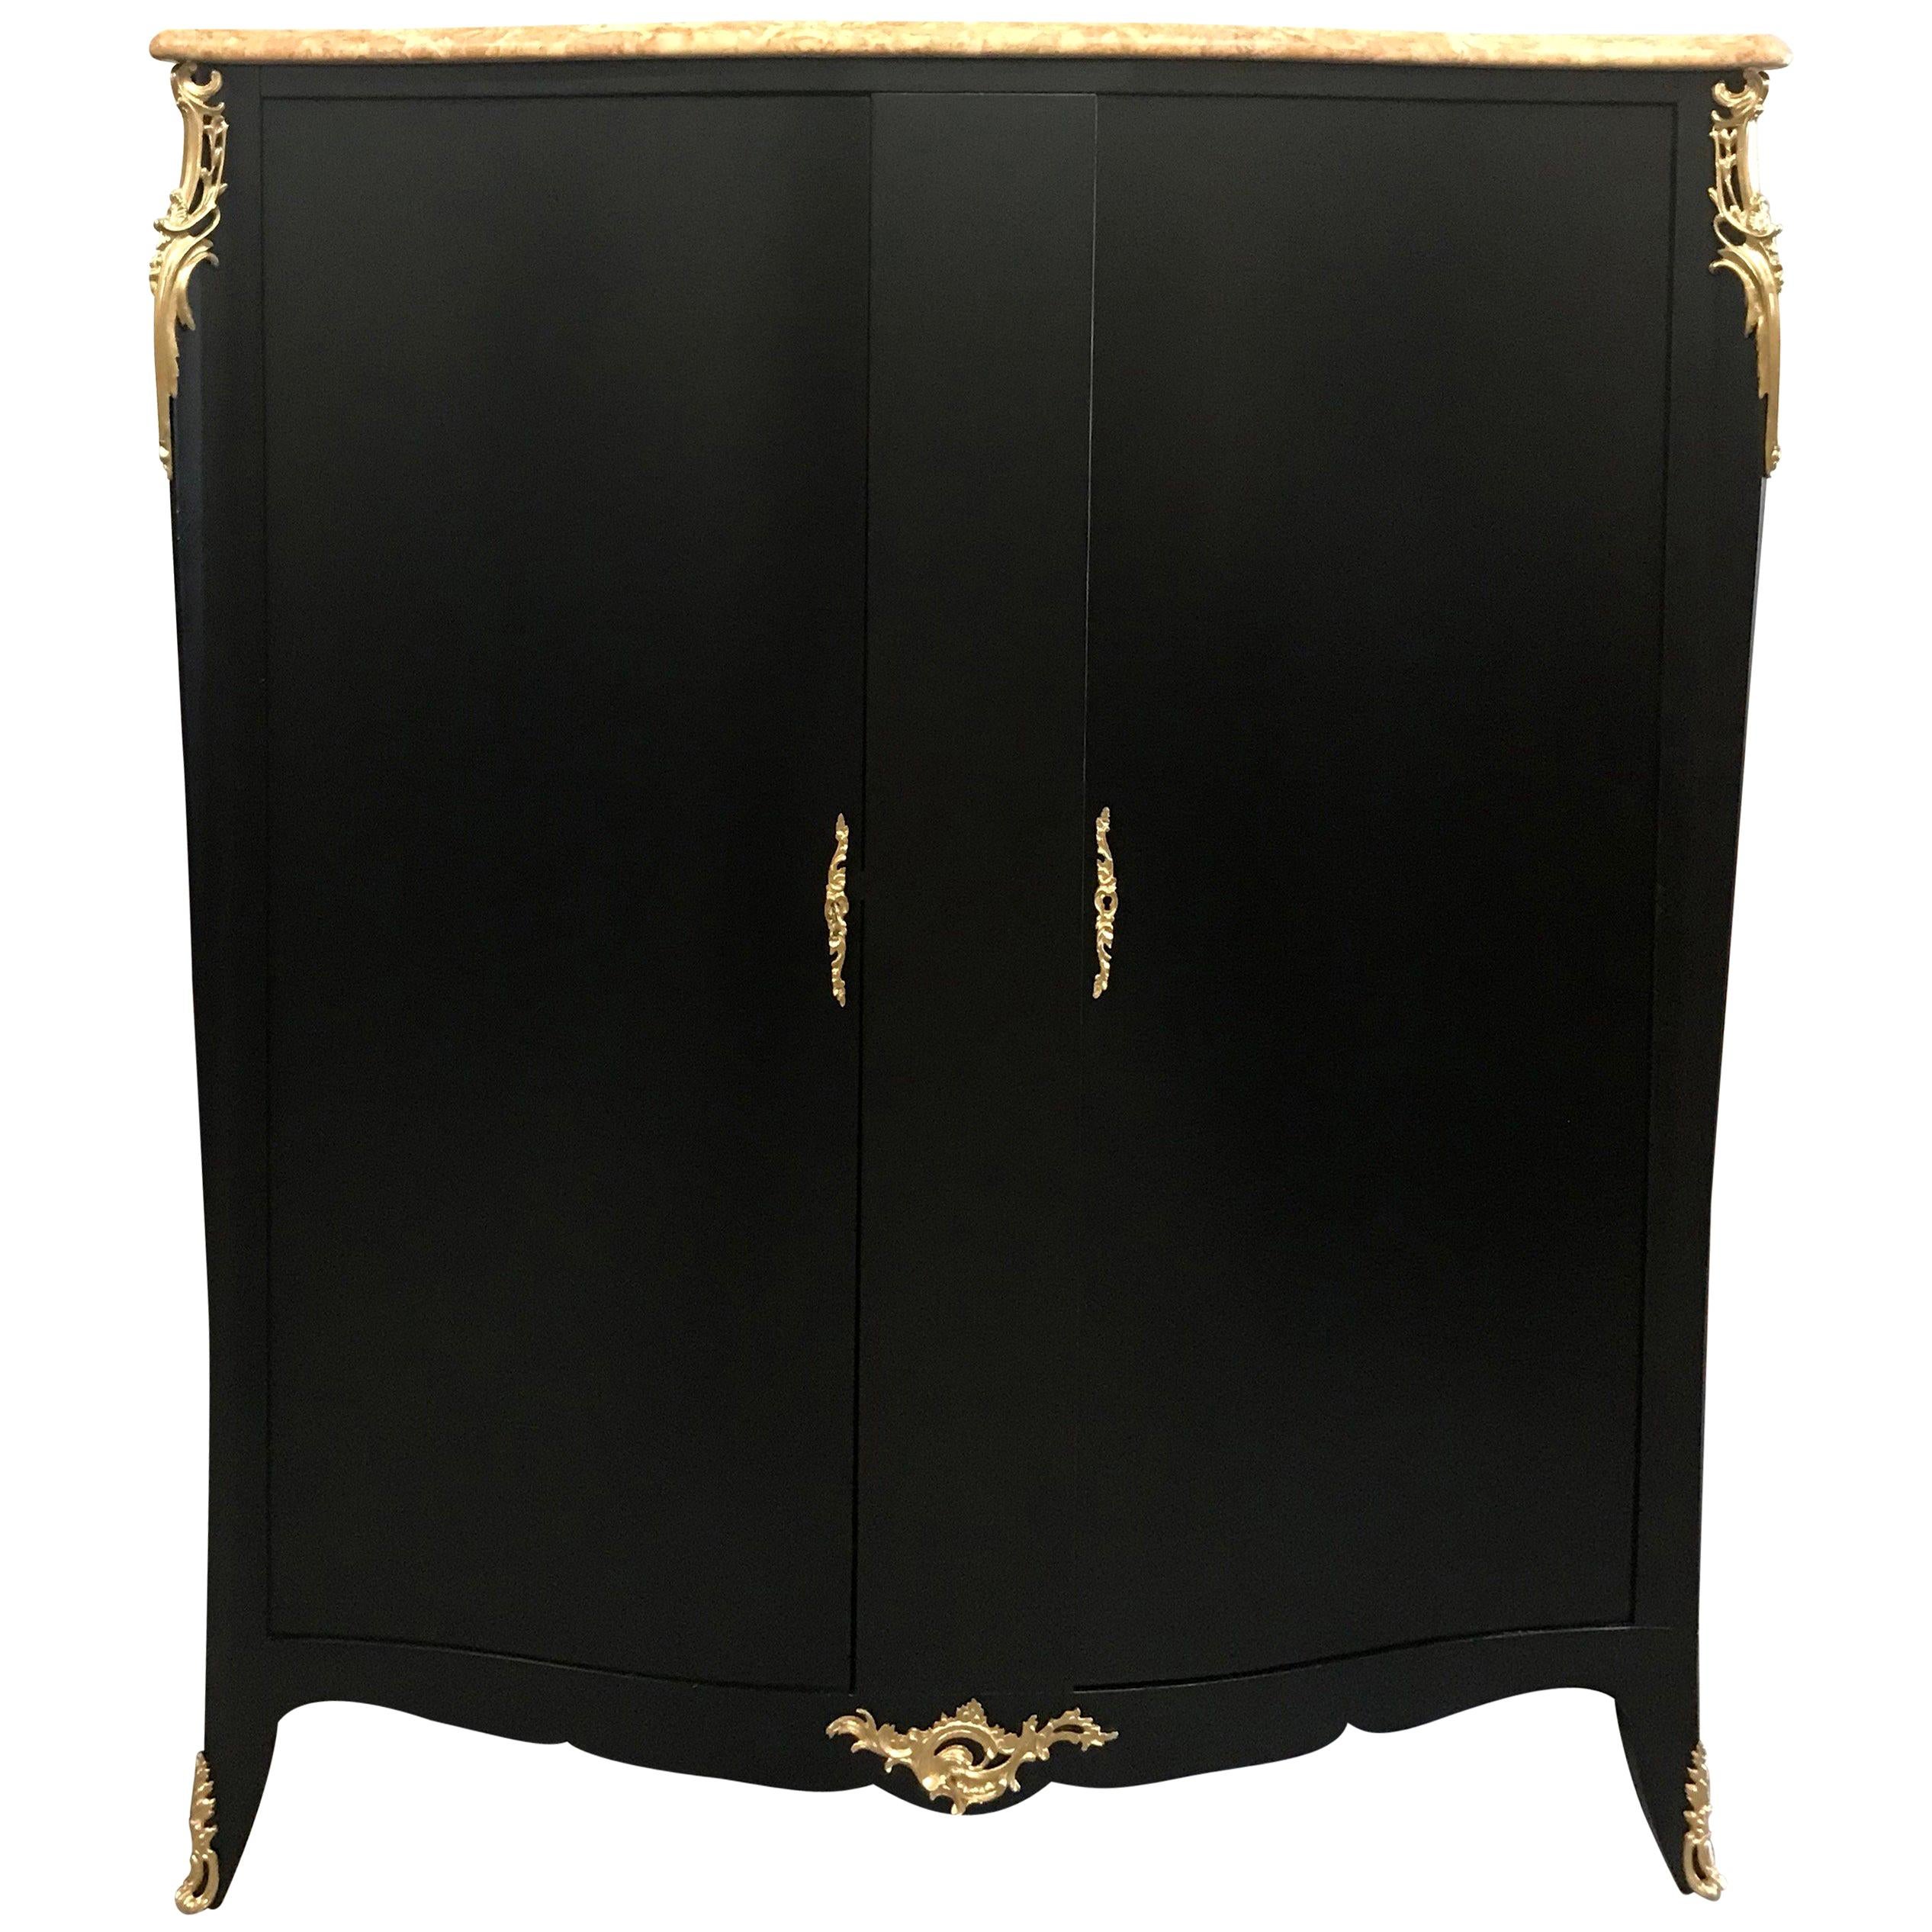 Monumental French Art Deco Ebonized Dry Bar Cabinet with Marble Top, 1940s